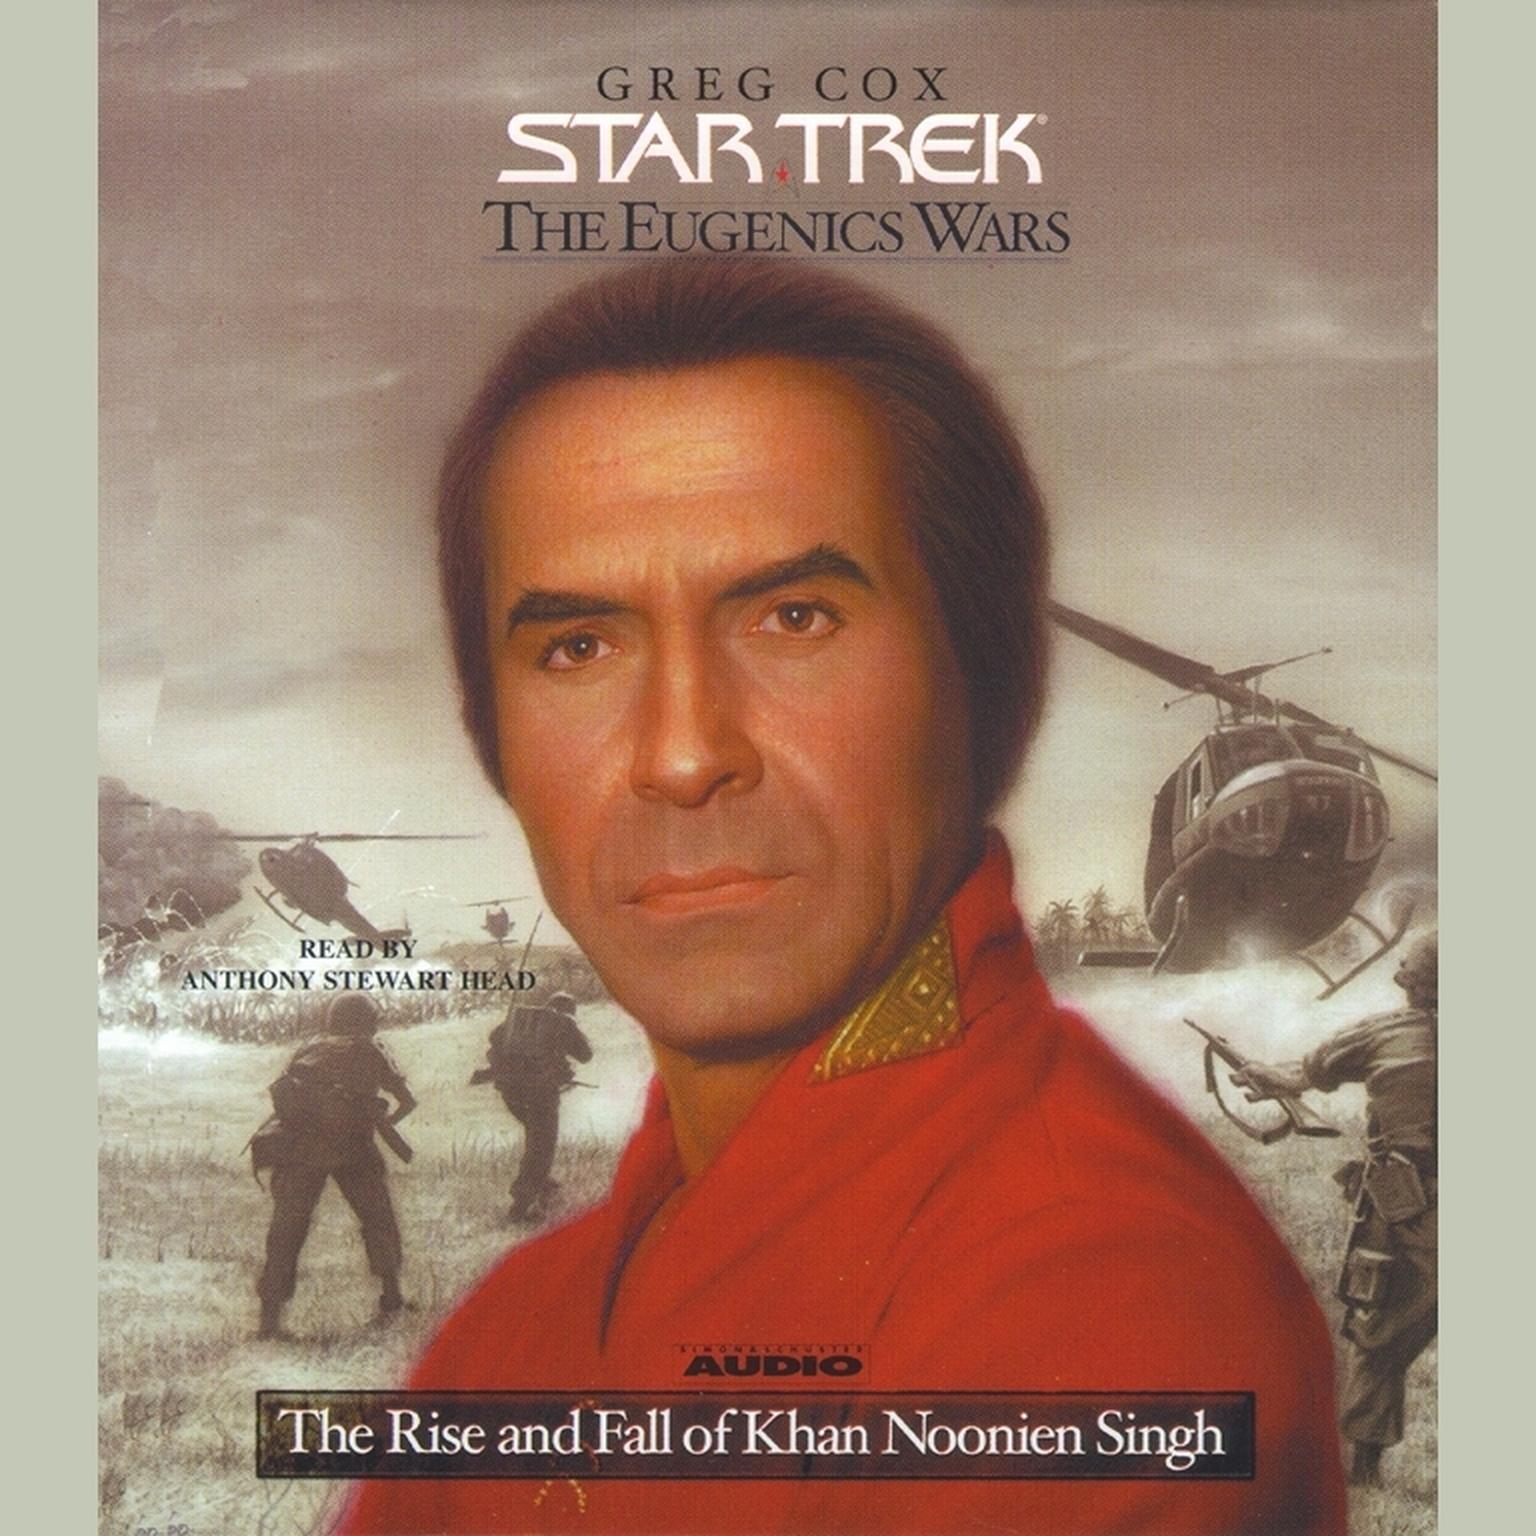 Eugenics Wars, Vol. 1: The Rise and Fall of Khan Noonien Singh Audiobook, by Greg Cox